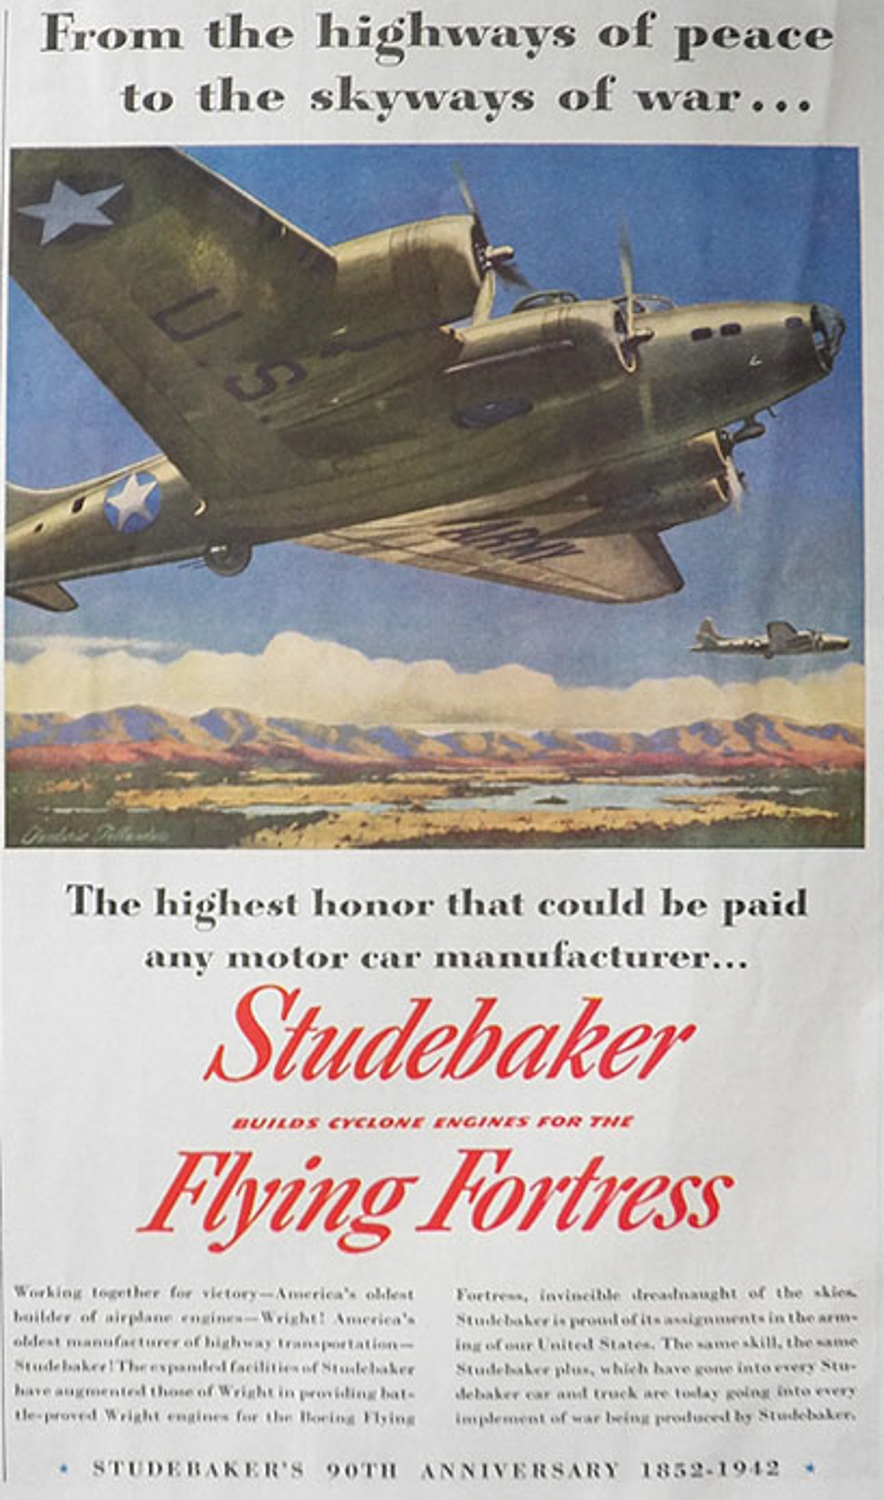 Studebaker built more than 63,000 engines for the Flying Fortress bomber. 